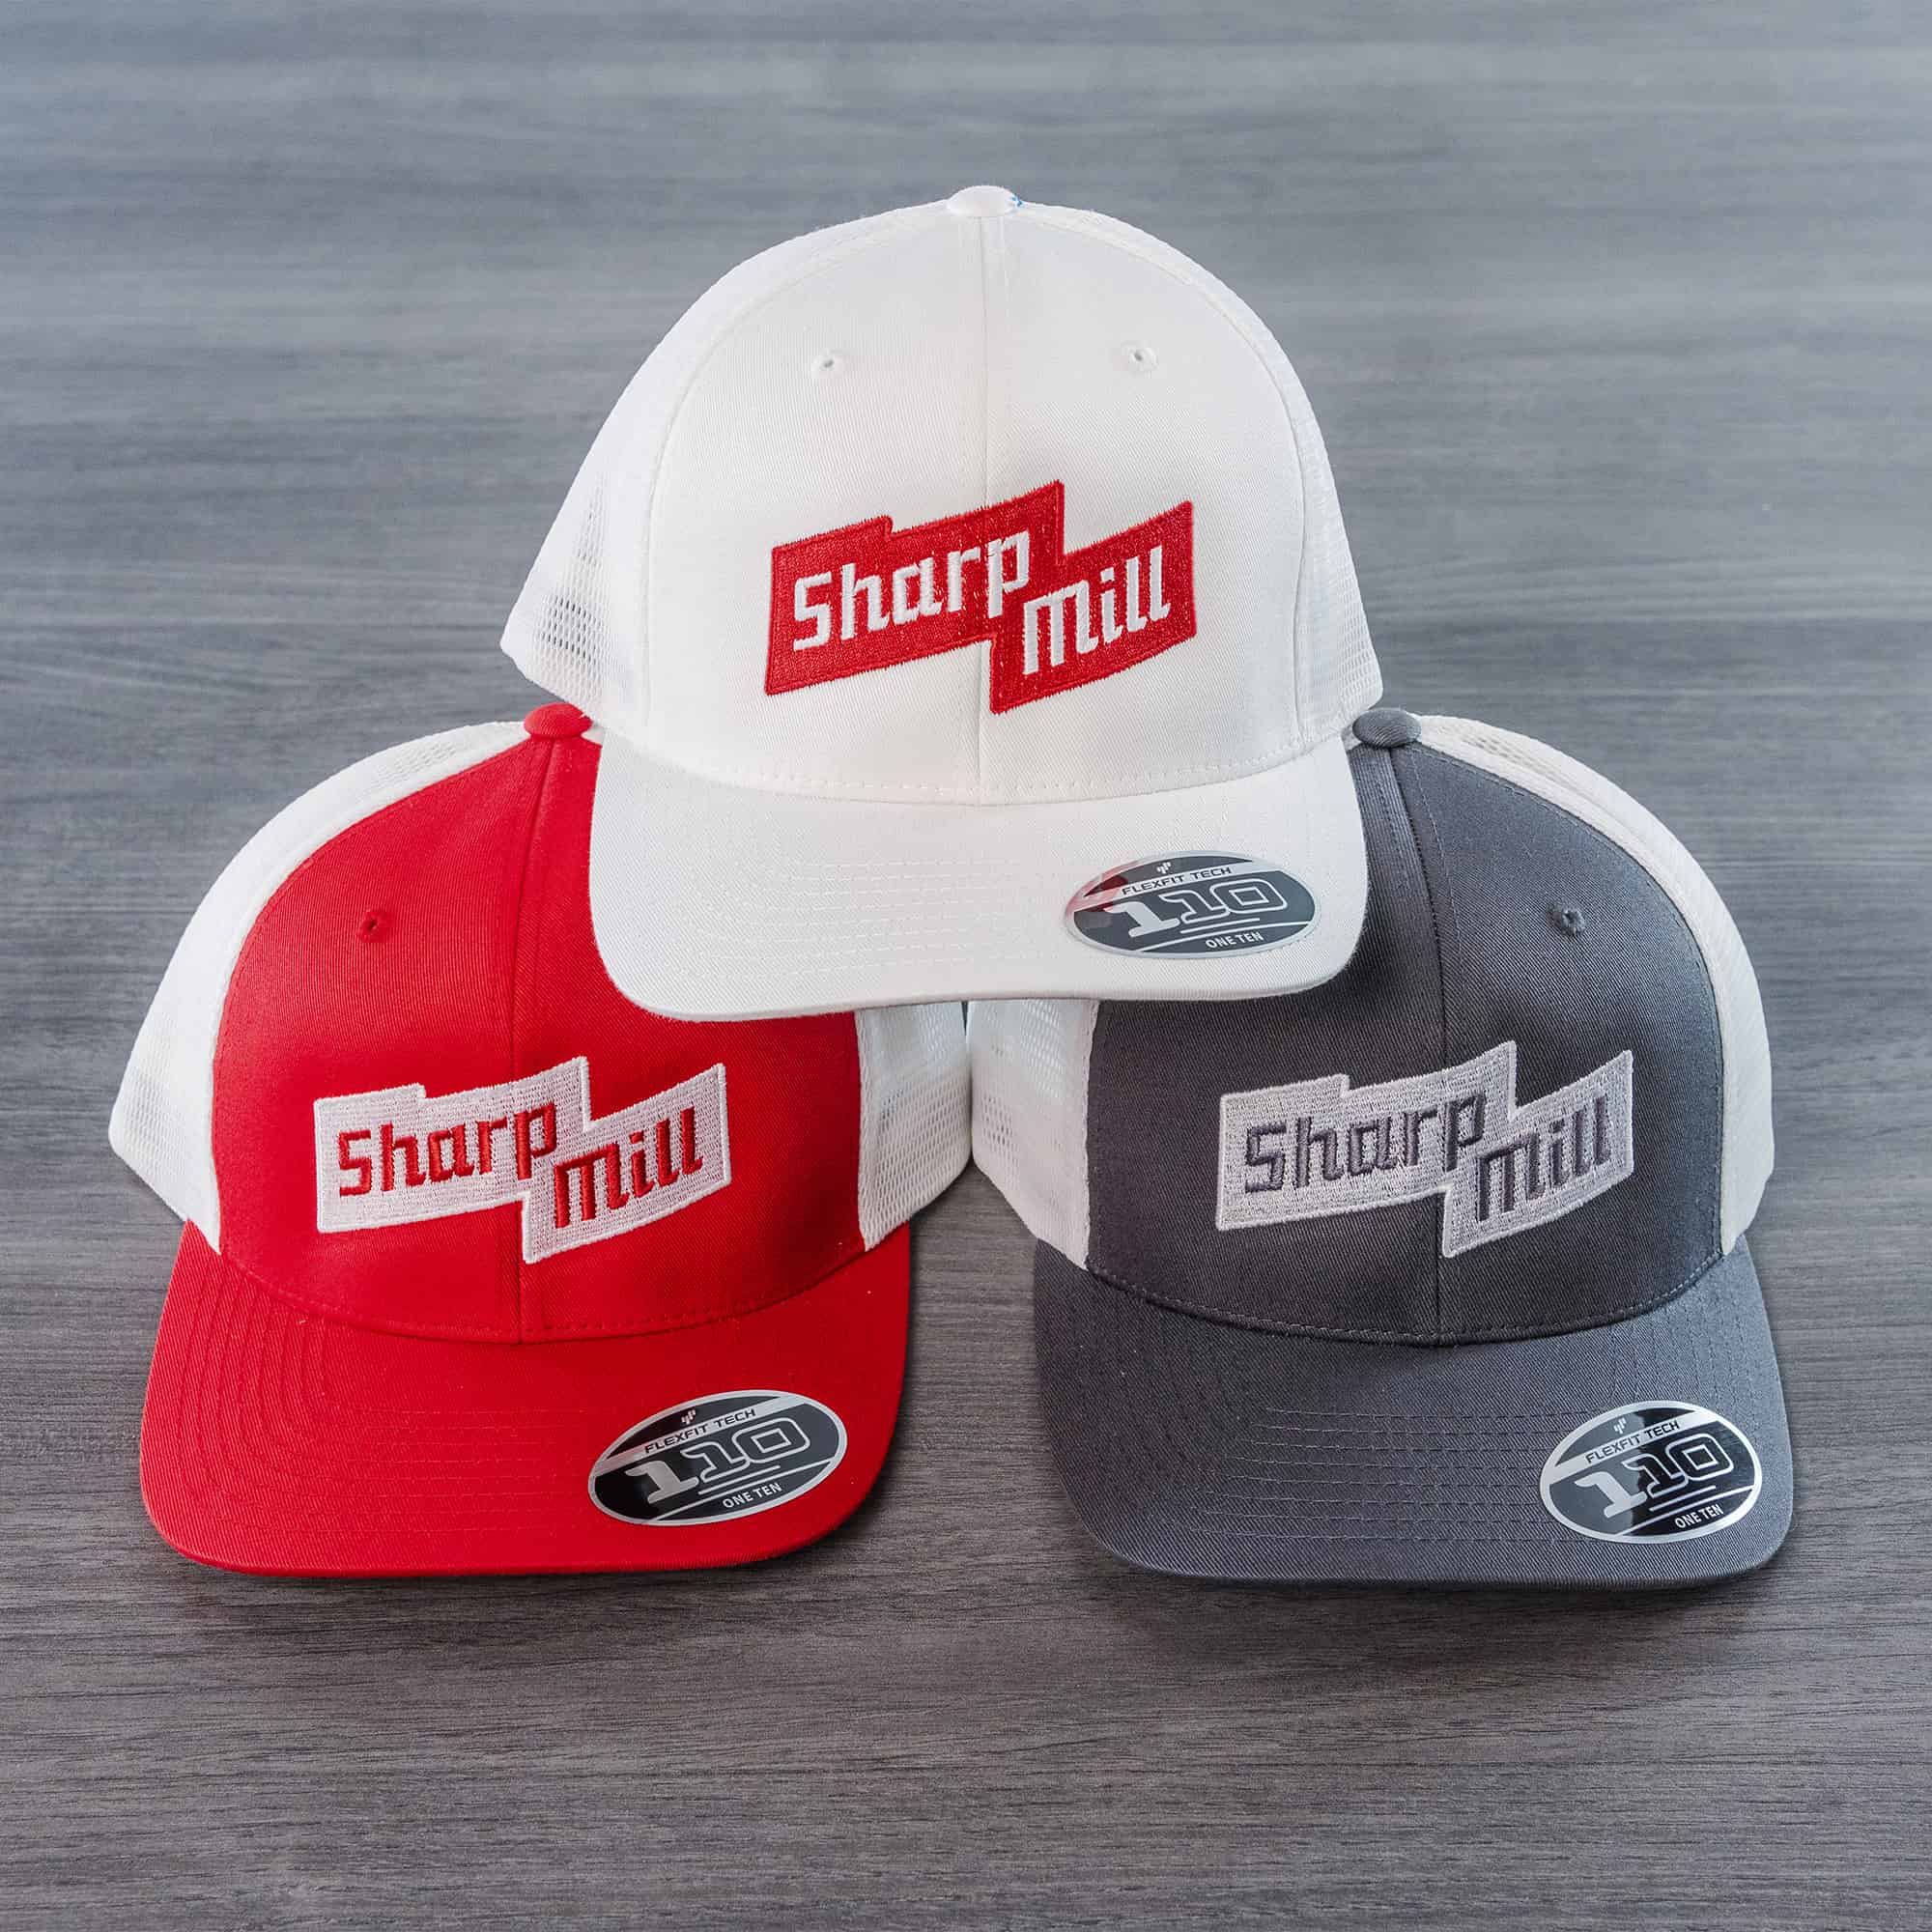 Three hats with the word shar-mall on them, used for a project.